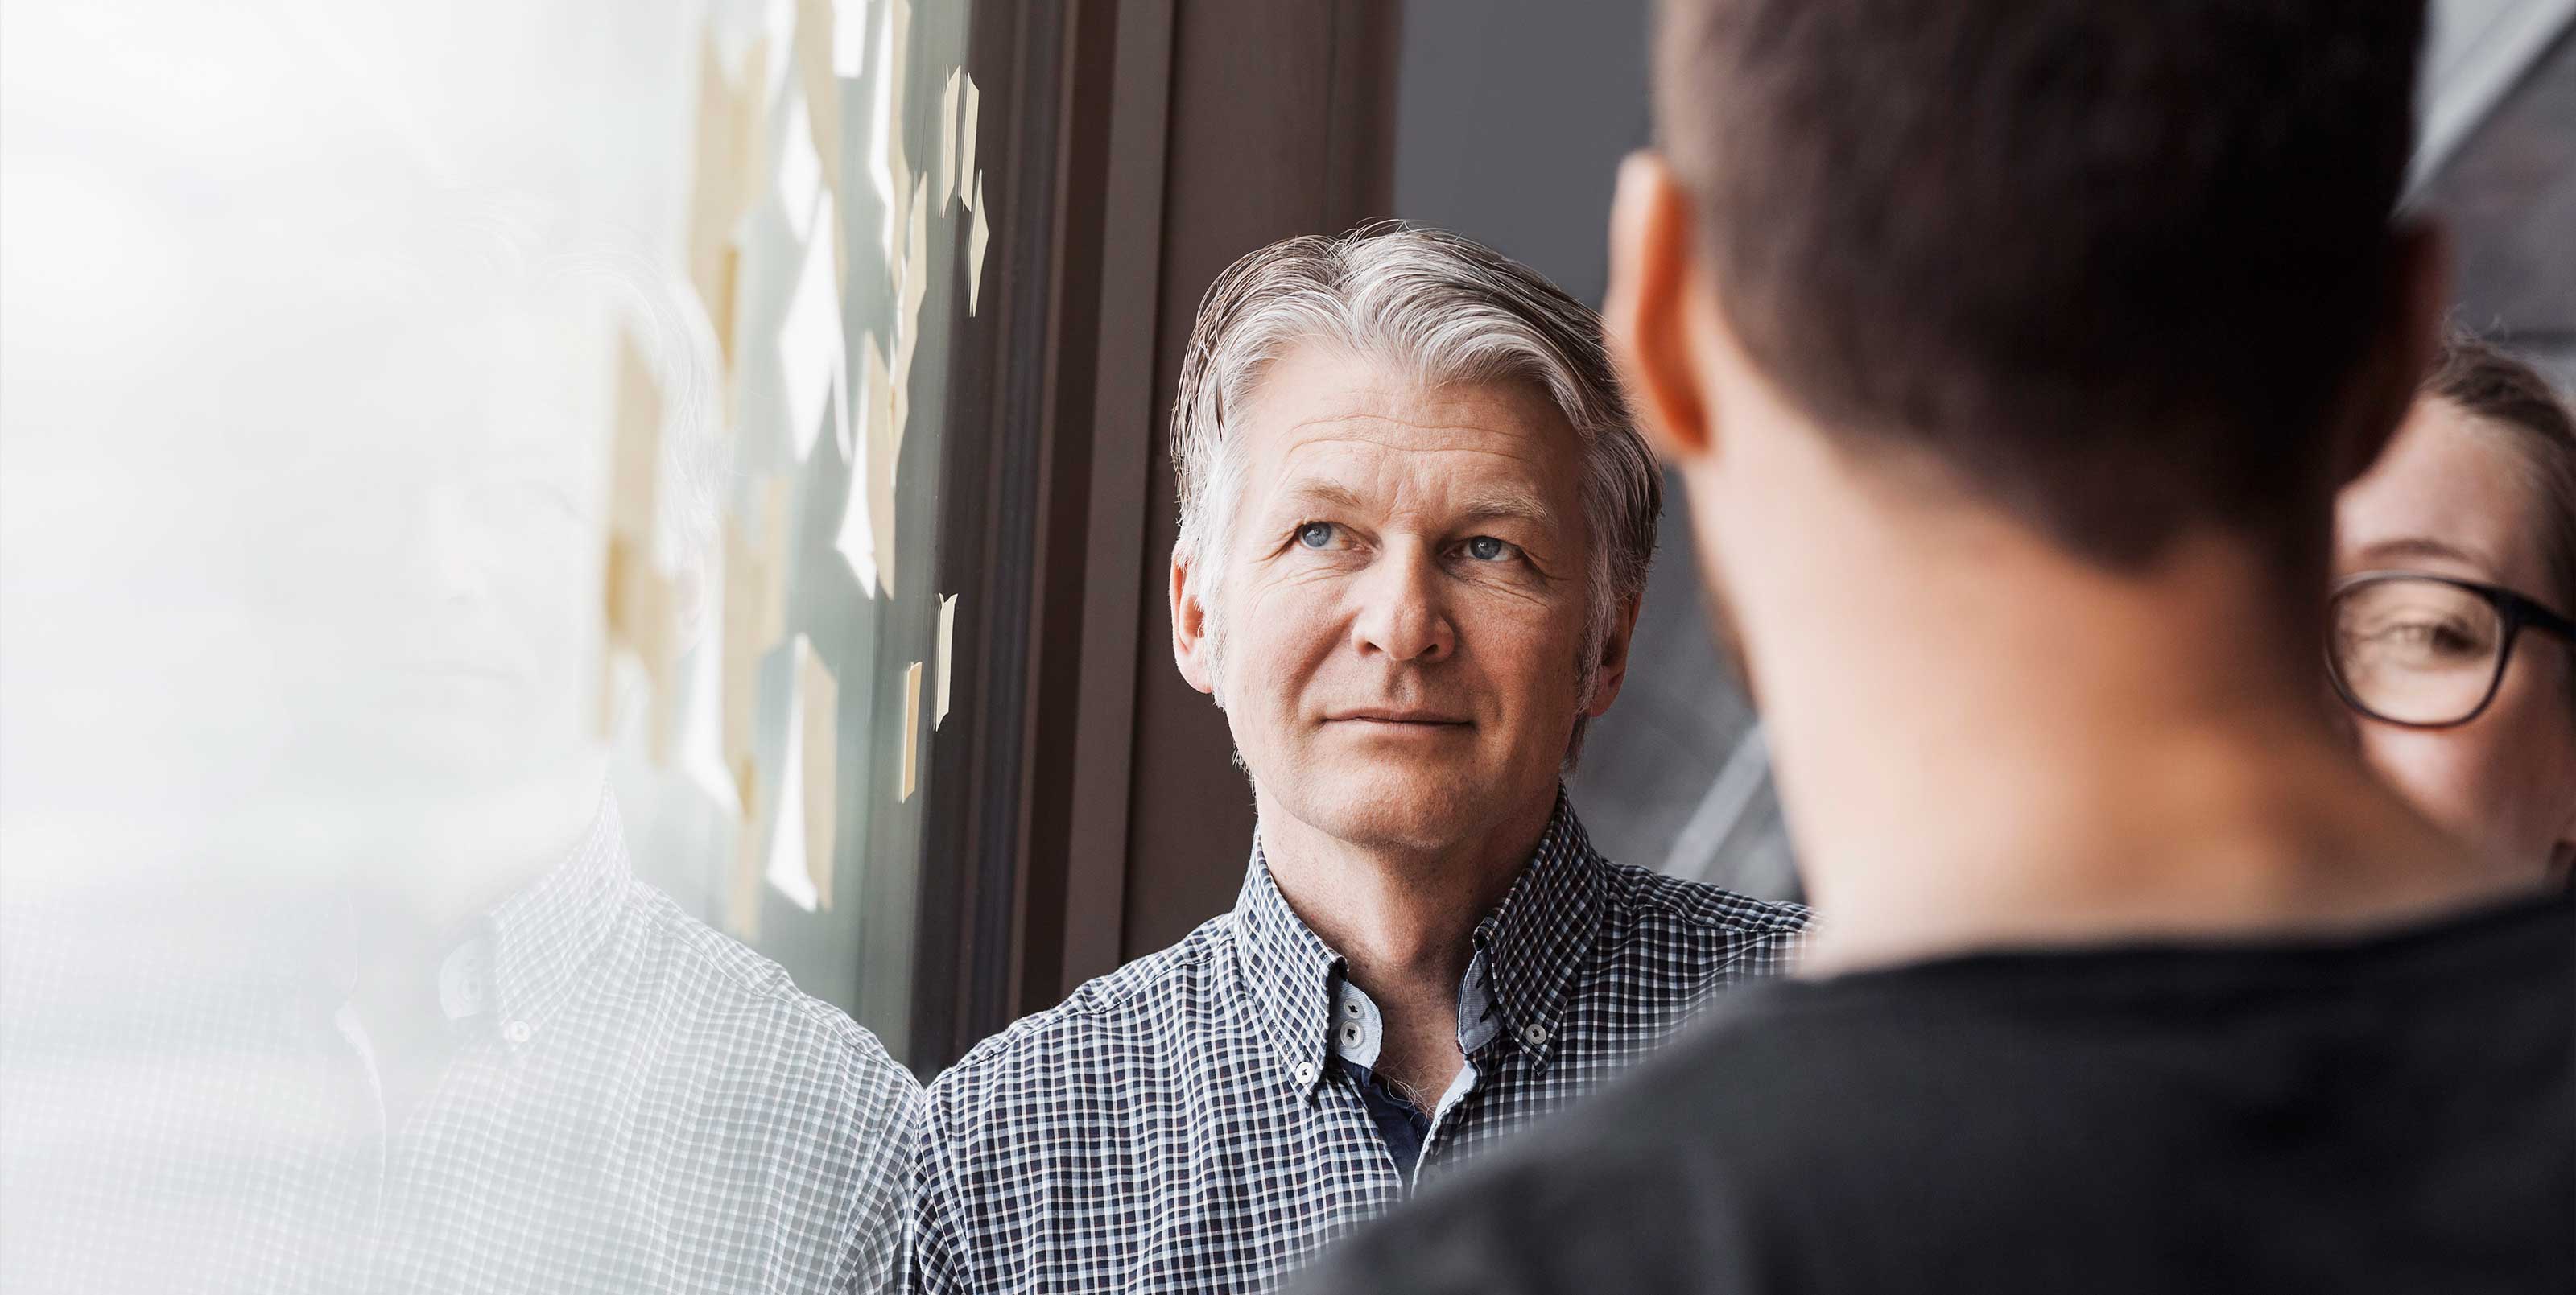 Man with thoughtful look in workshop with two other people